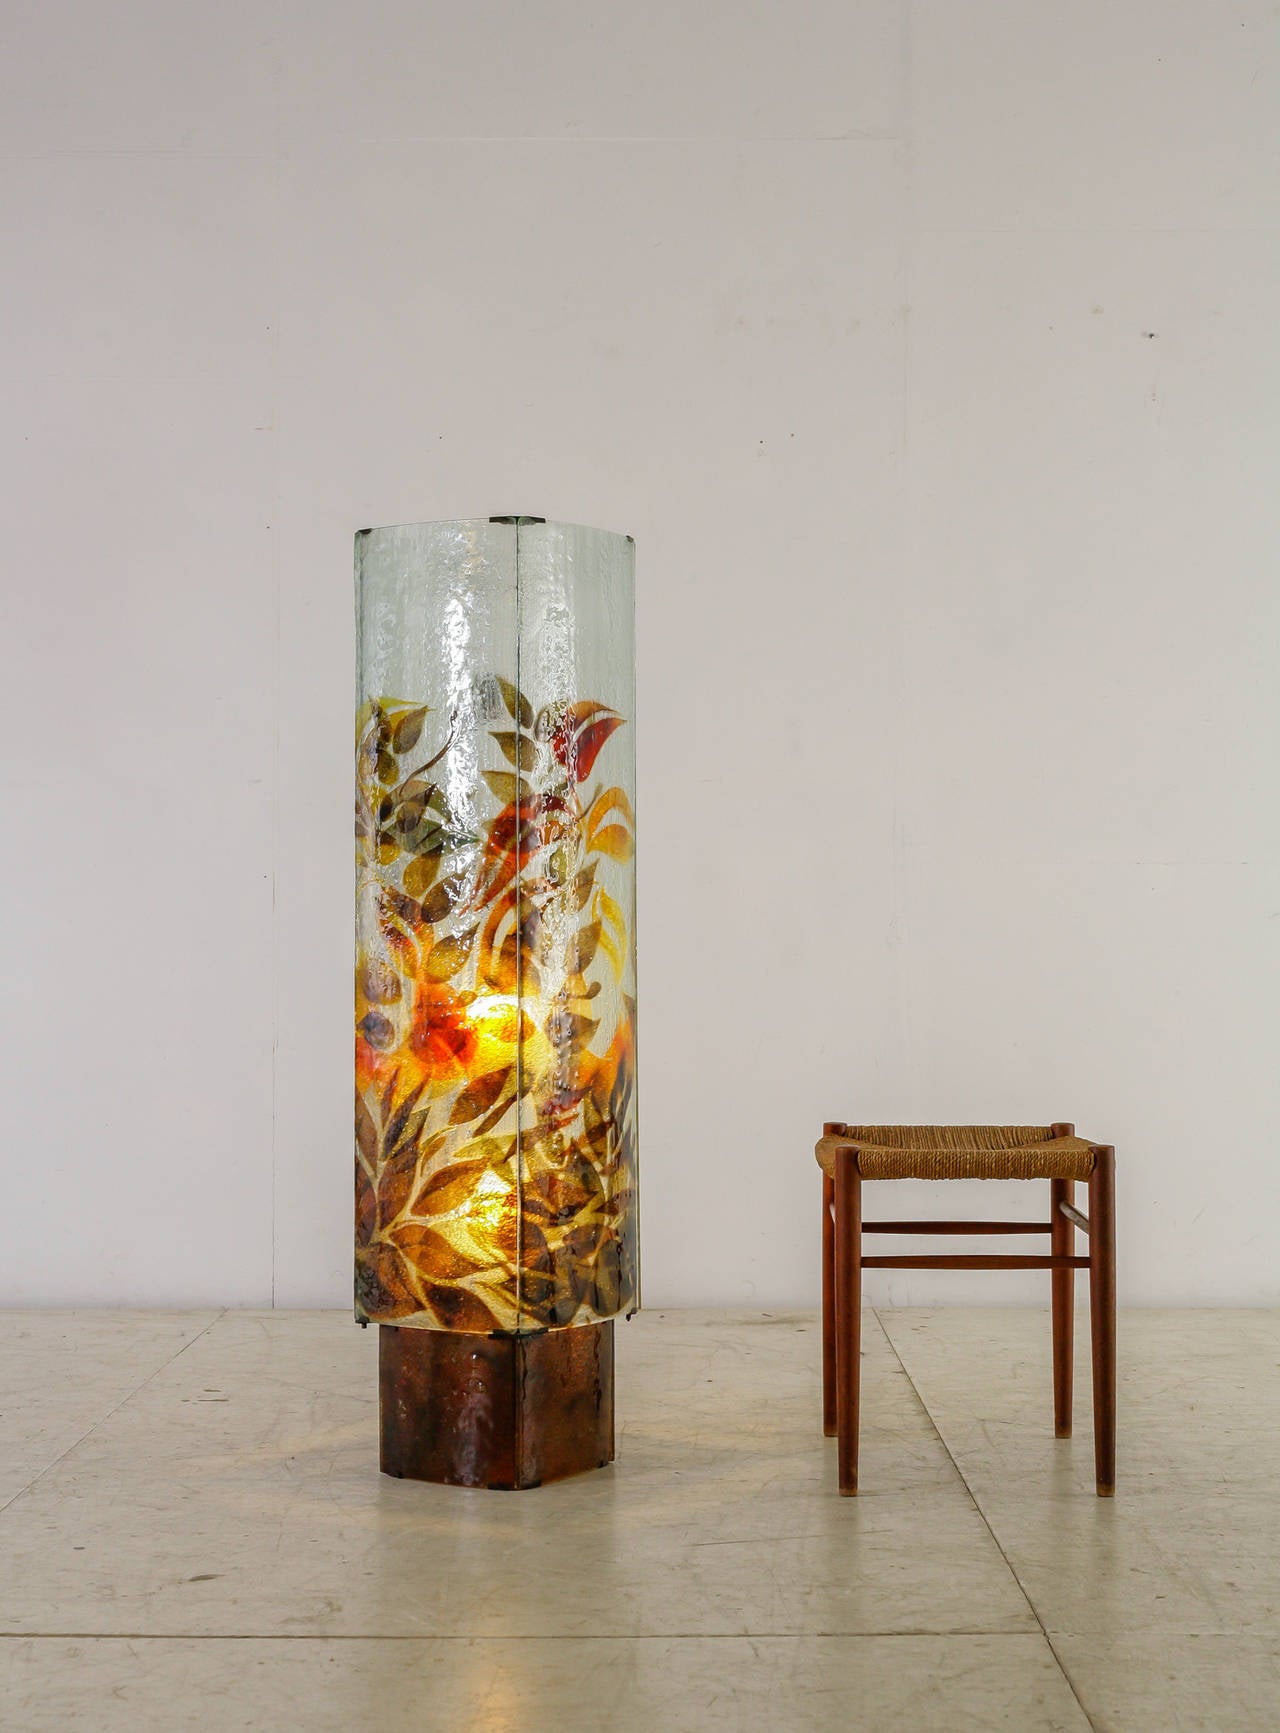 A pair of large 1960s glass floor or table lamps with a floral motif. The diffusers are made of four glass plates, held by an internal metal frame. The bases are made of four dark glass plates.

They are wonderful decorative pieces, that in the